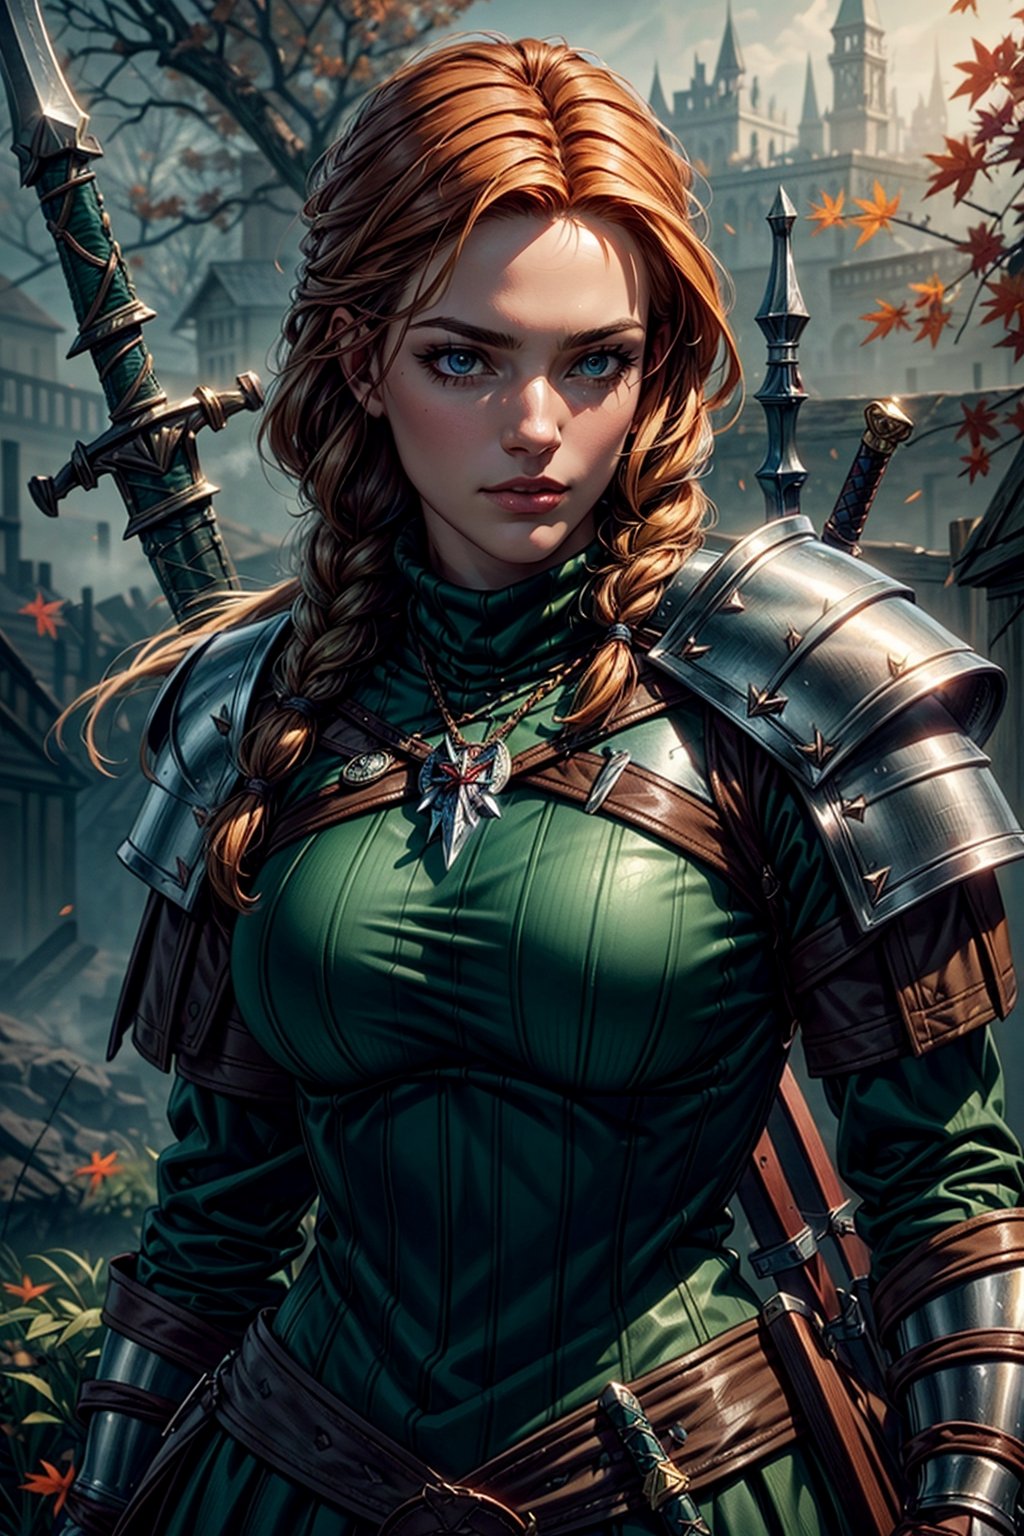 Masterpiece, beautiful details, perfect focus, uniform 8K wallpaper, high resolution, exquisite texture in every detail, Female witcher, ginger hair, braided hair, two swords on back, wolfhead medallion, witcher armor, Dimly lit, Foggy, Octane Render, Fantasy style, Dark souls style, wood, autumn, (green glowing eyes), Masterpiece, 